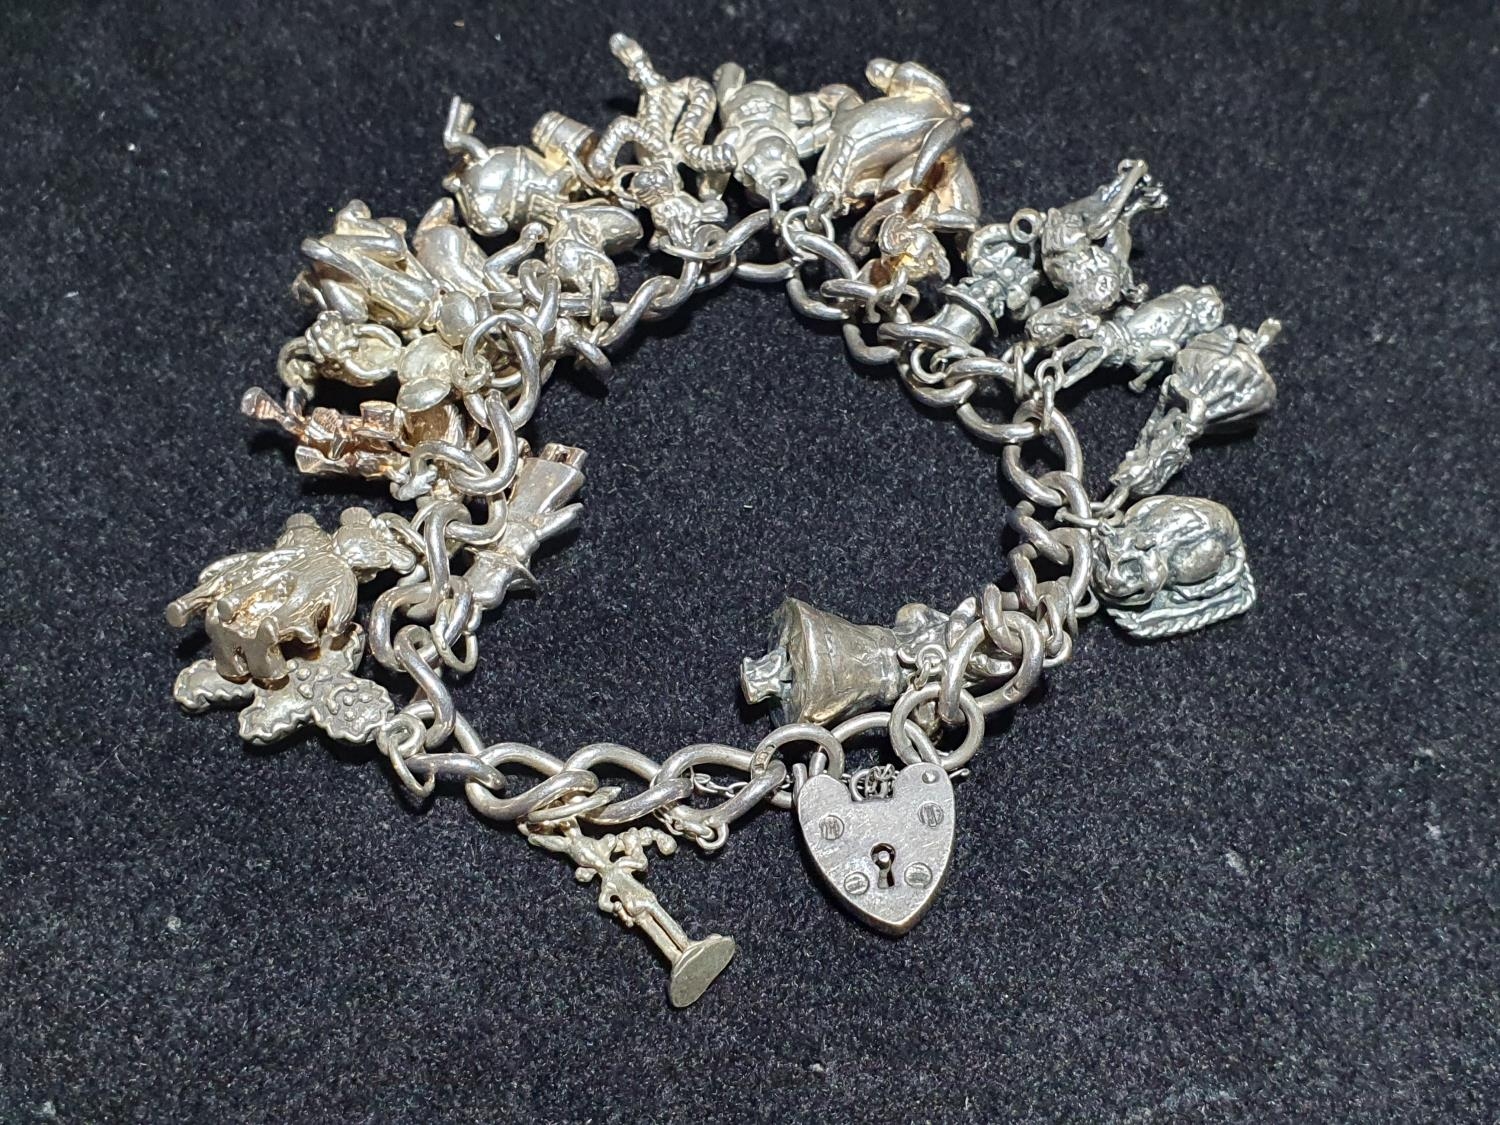 A hallmarked silver bracelet with 925 and white metal charms (Disney themed). Weight 96g